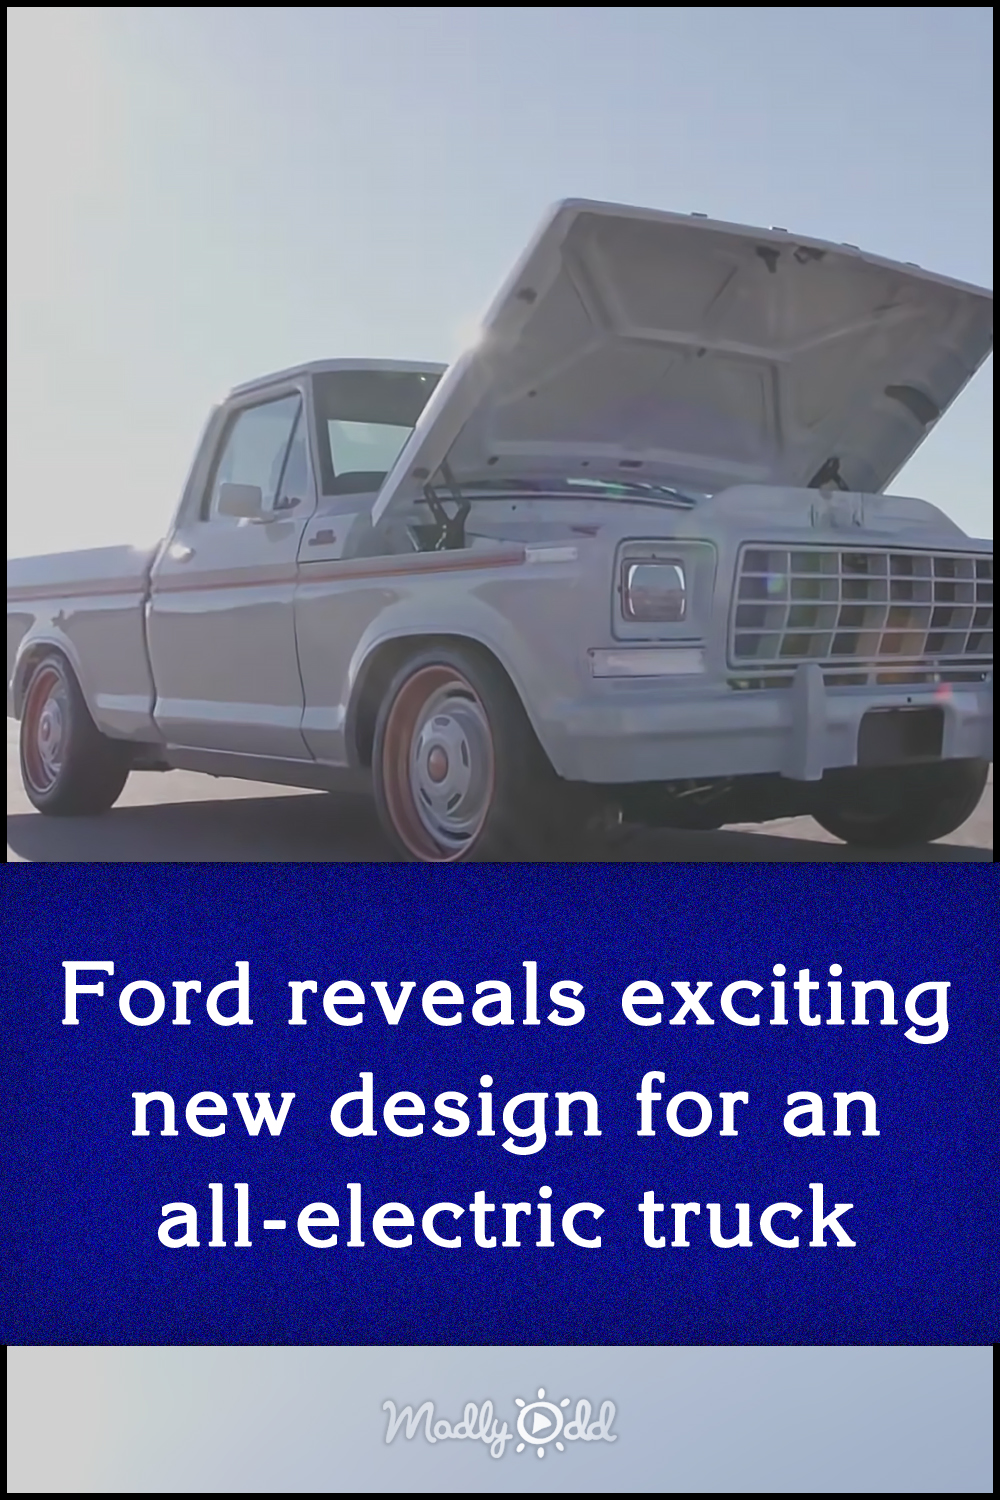 Ford reveals exciting new design for an all-electric truck